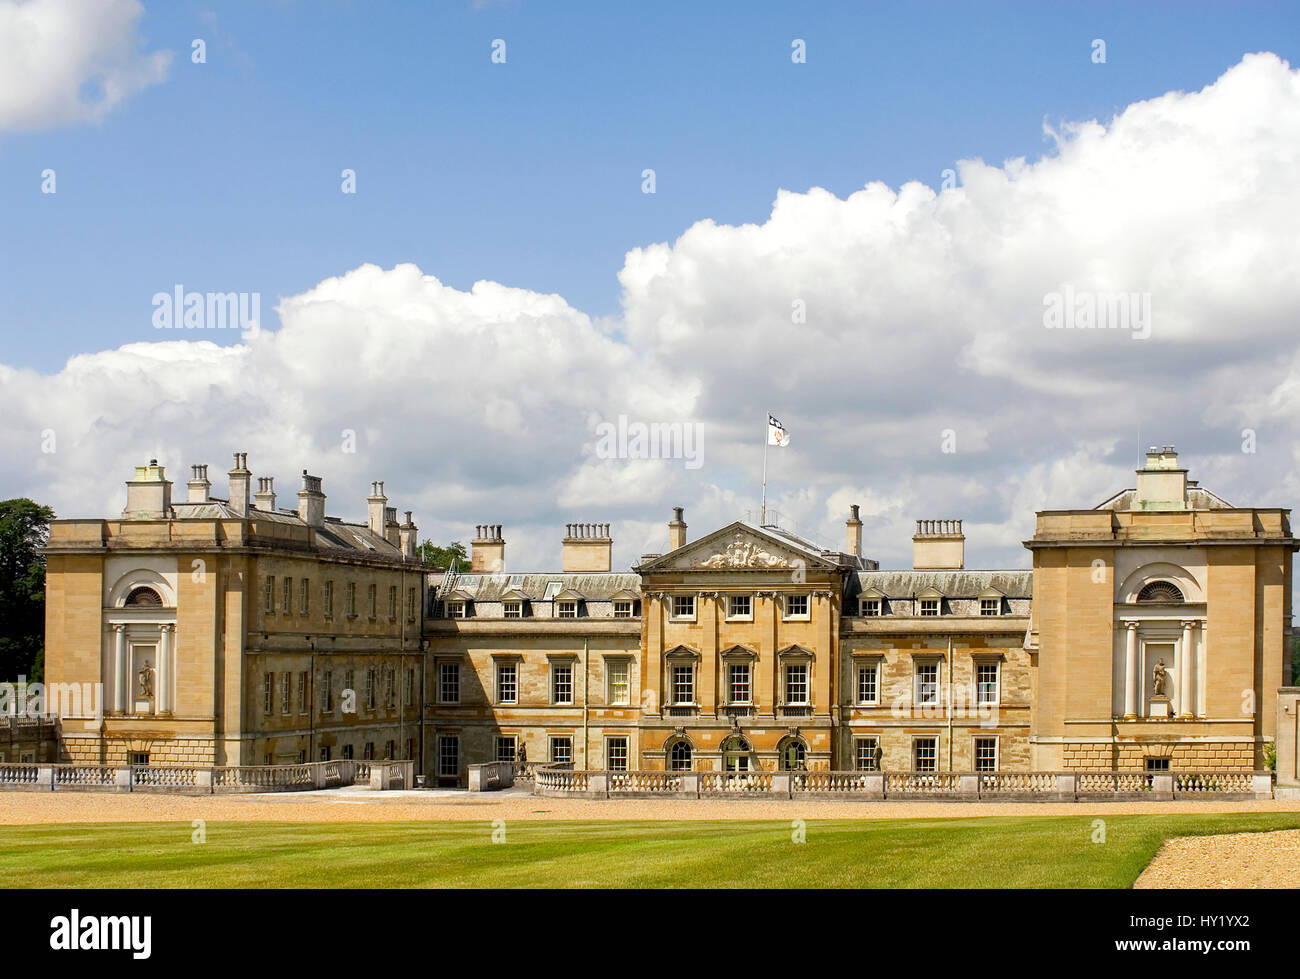 Woburn Abbey, near Woburn, Bedfordshire, England, is the seat of the Duke of Bedford and the location of the Woburn Safari Park. Woburn Abbey, compris Stock Photo